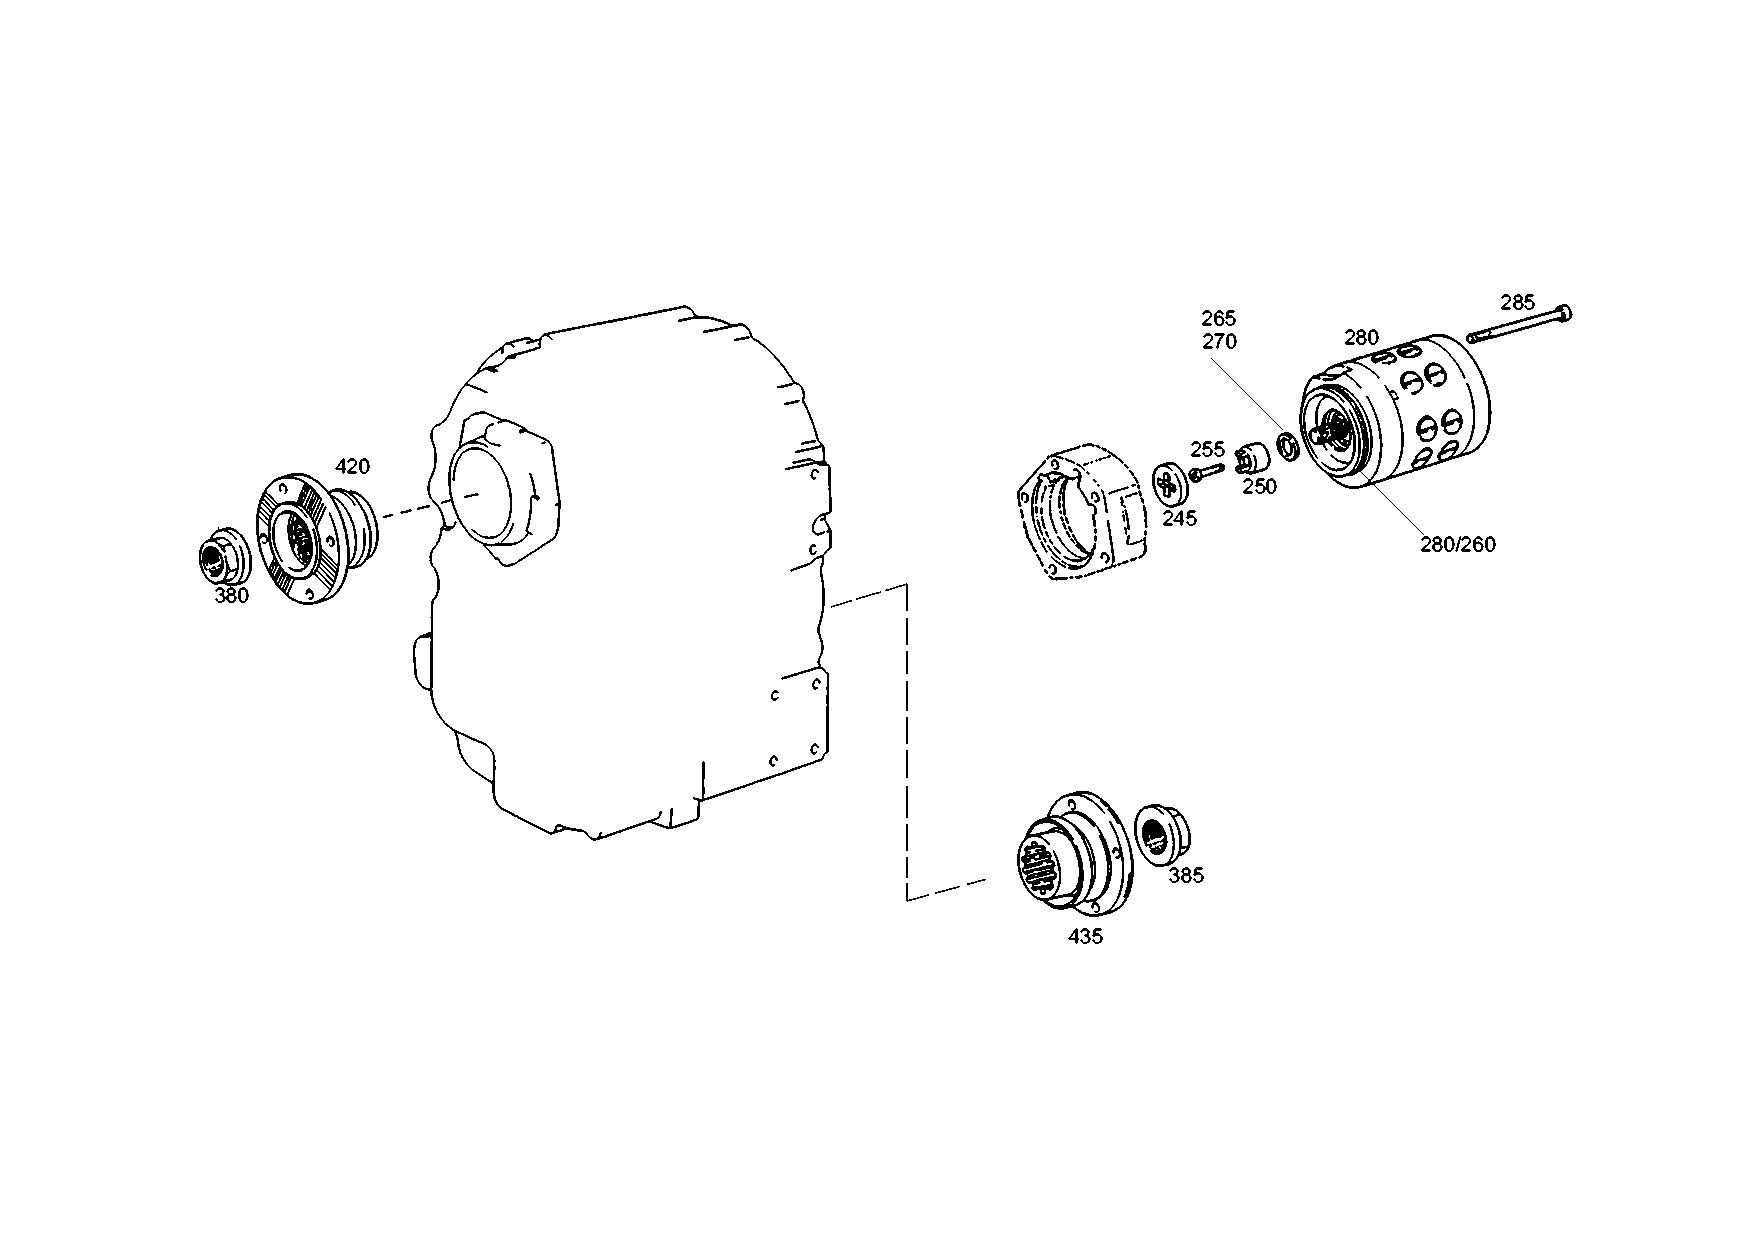 drawing for MARMON Herring MVG121059 - INPUT GEAR